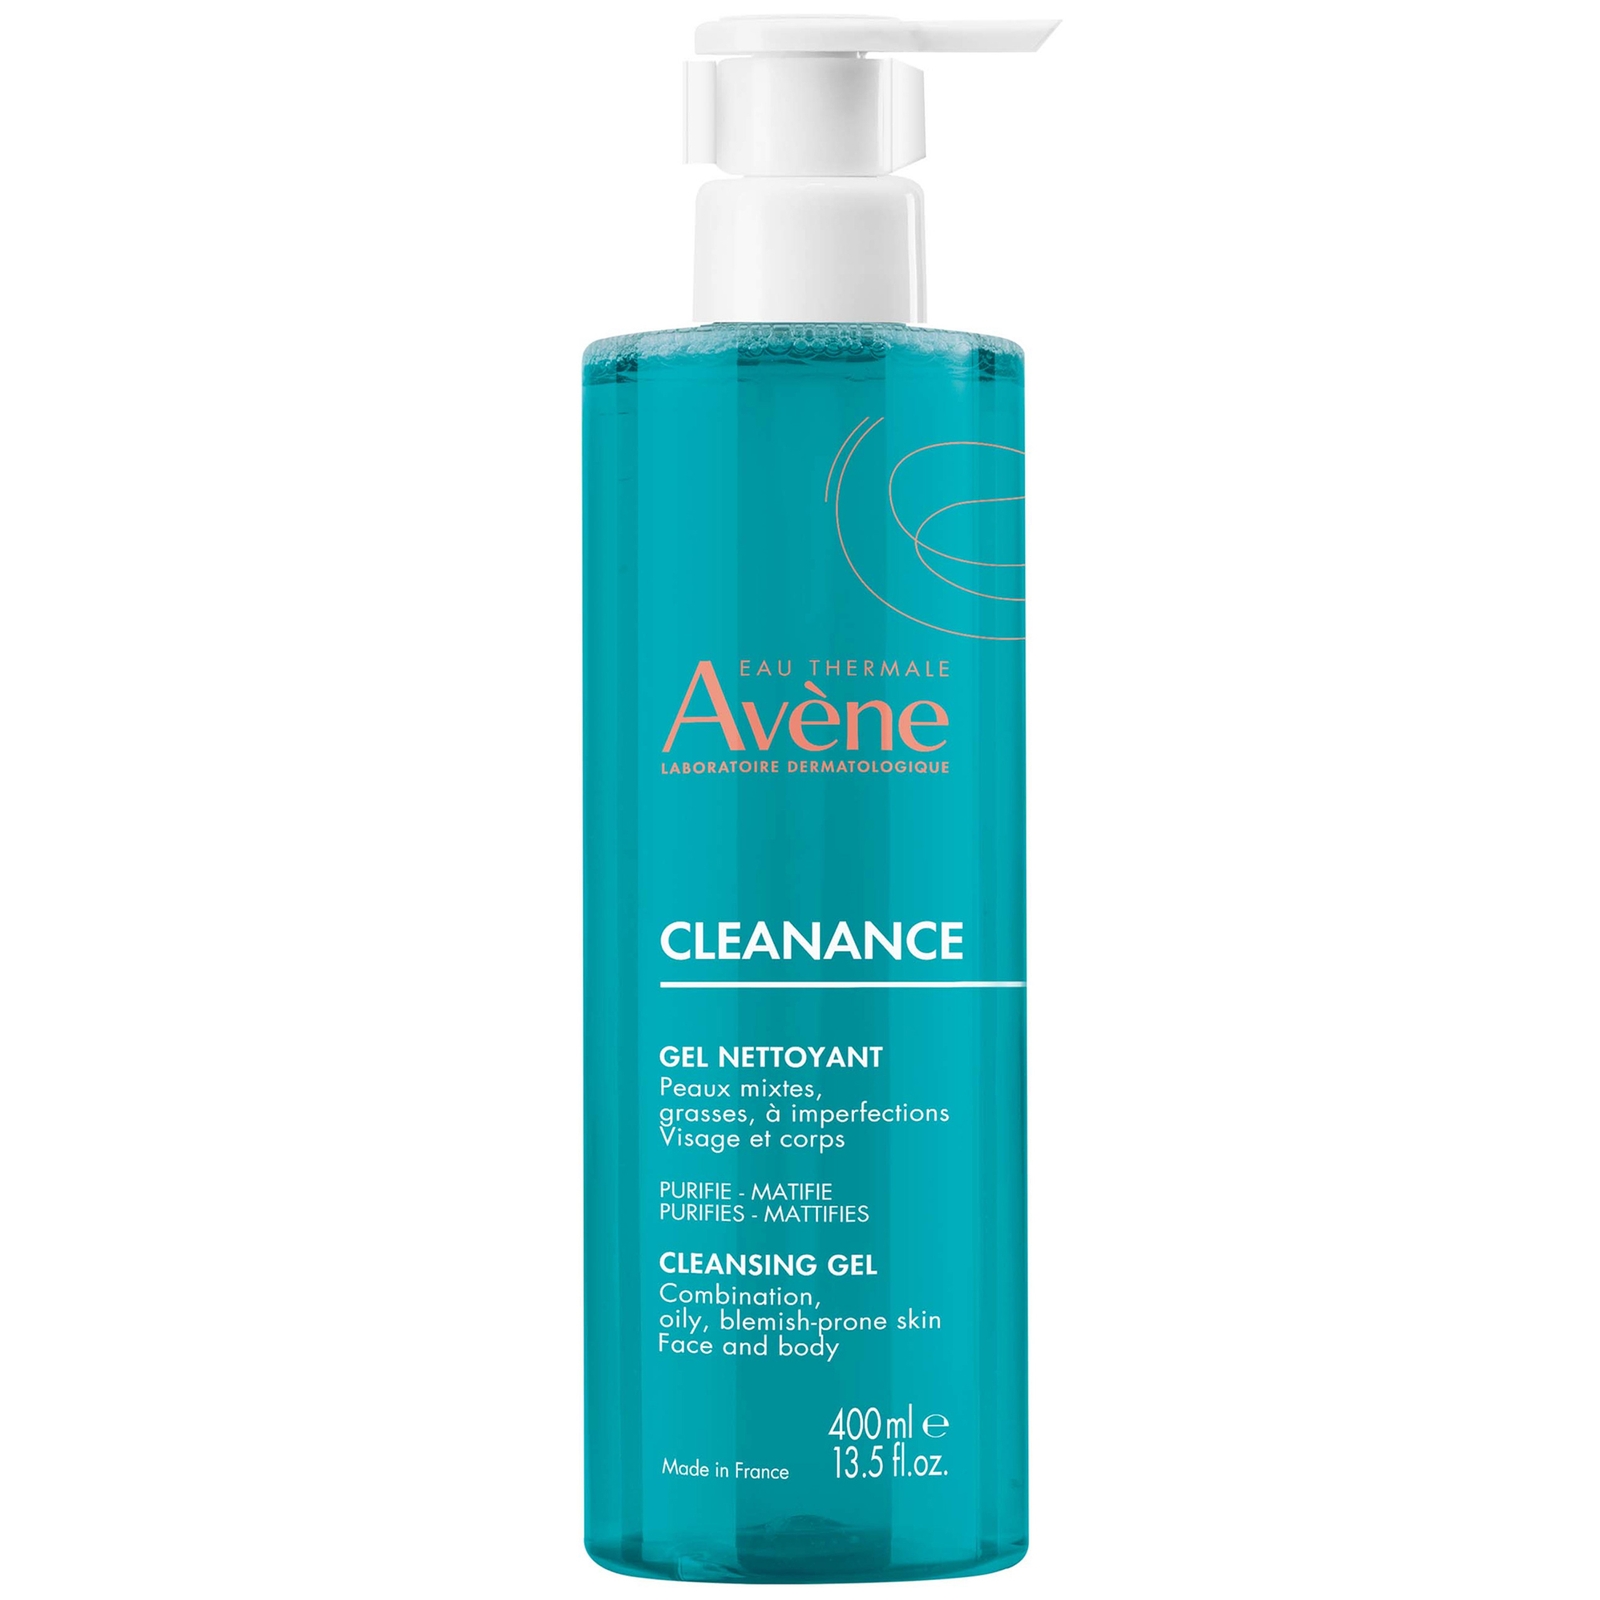 Photos - Facial / Body Cleansing Product Avene Avène Cleanance Cleansing Gel For Oily, Blemish Prone Skin 400ml P0008285 